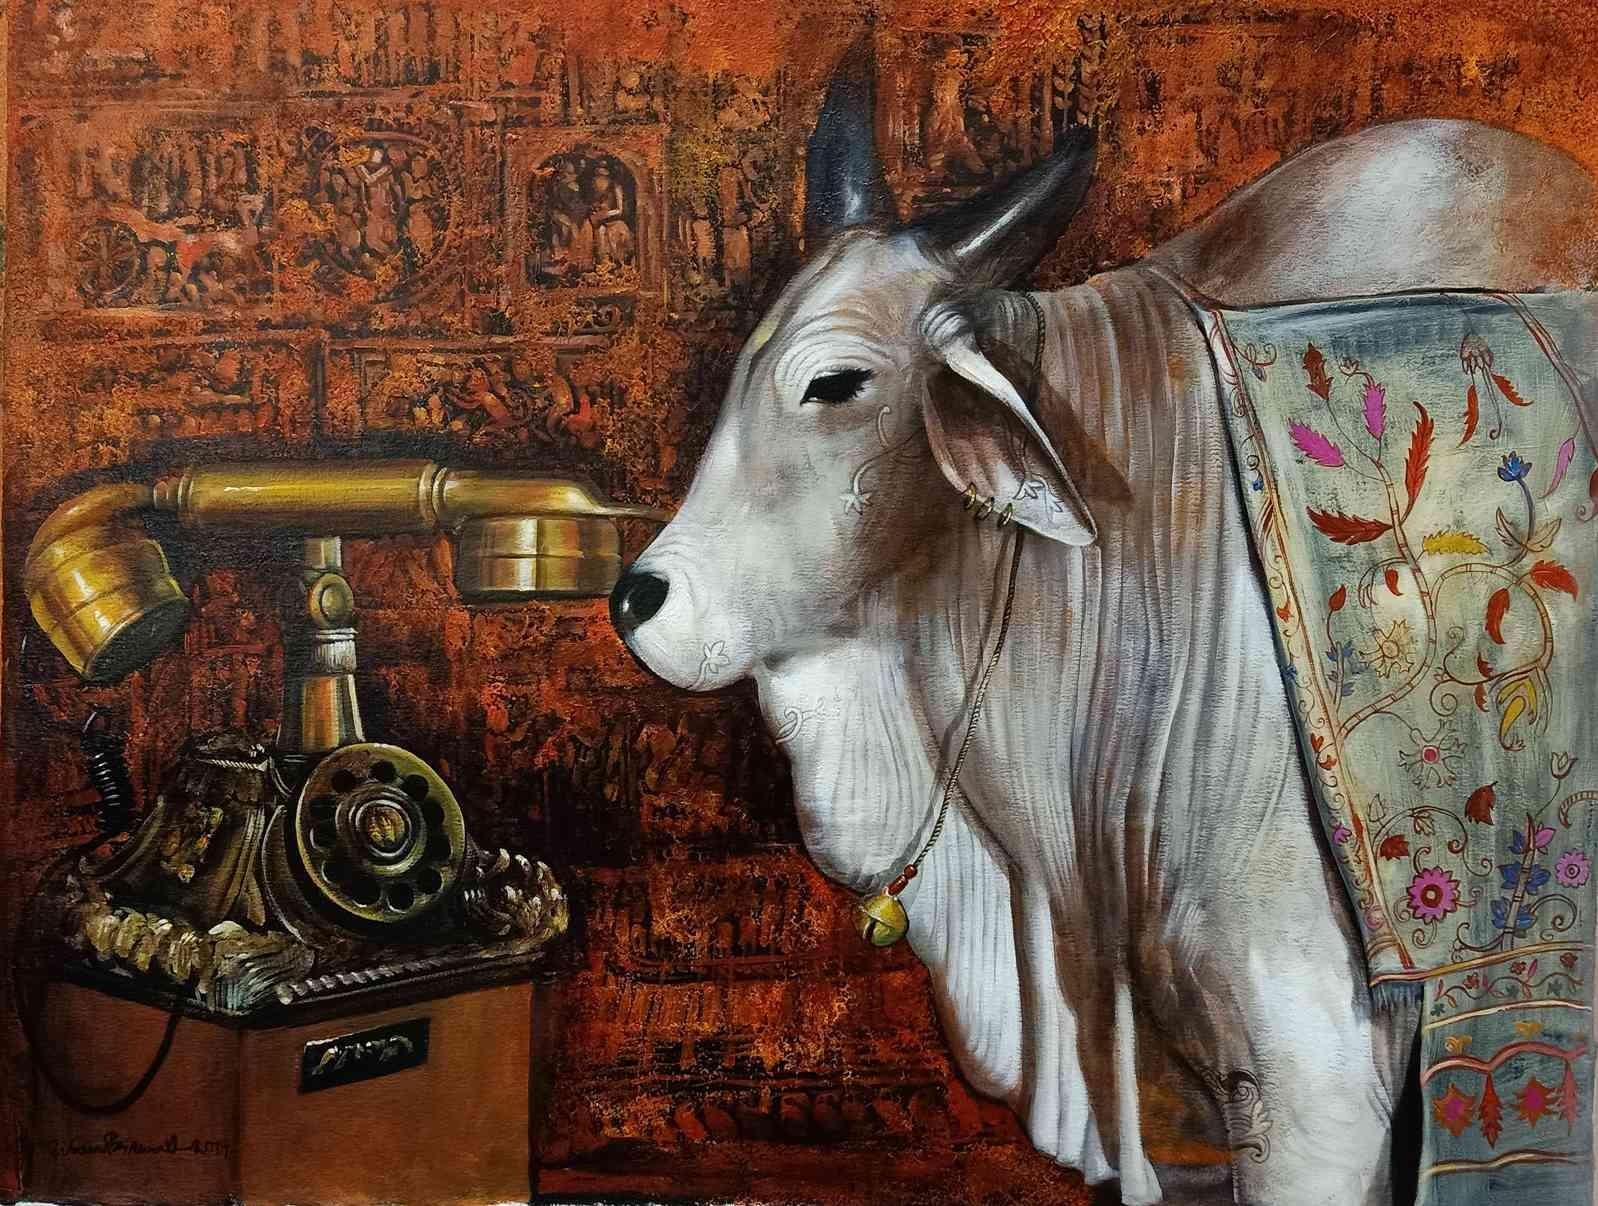 Jiban Biswas Animal Painting - Nostalgia, Acrylic on canvas, Brown, Red by Contemporary Artist "In Stock"